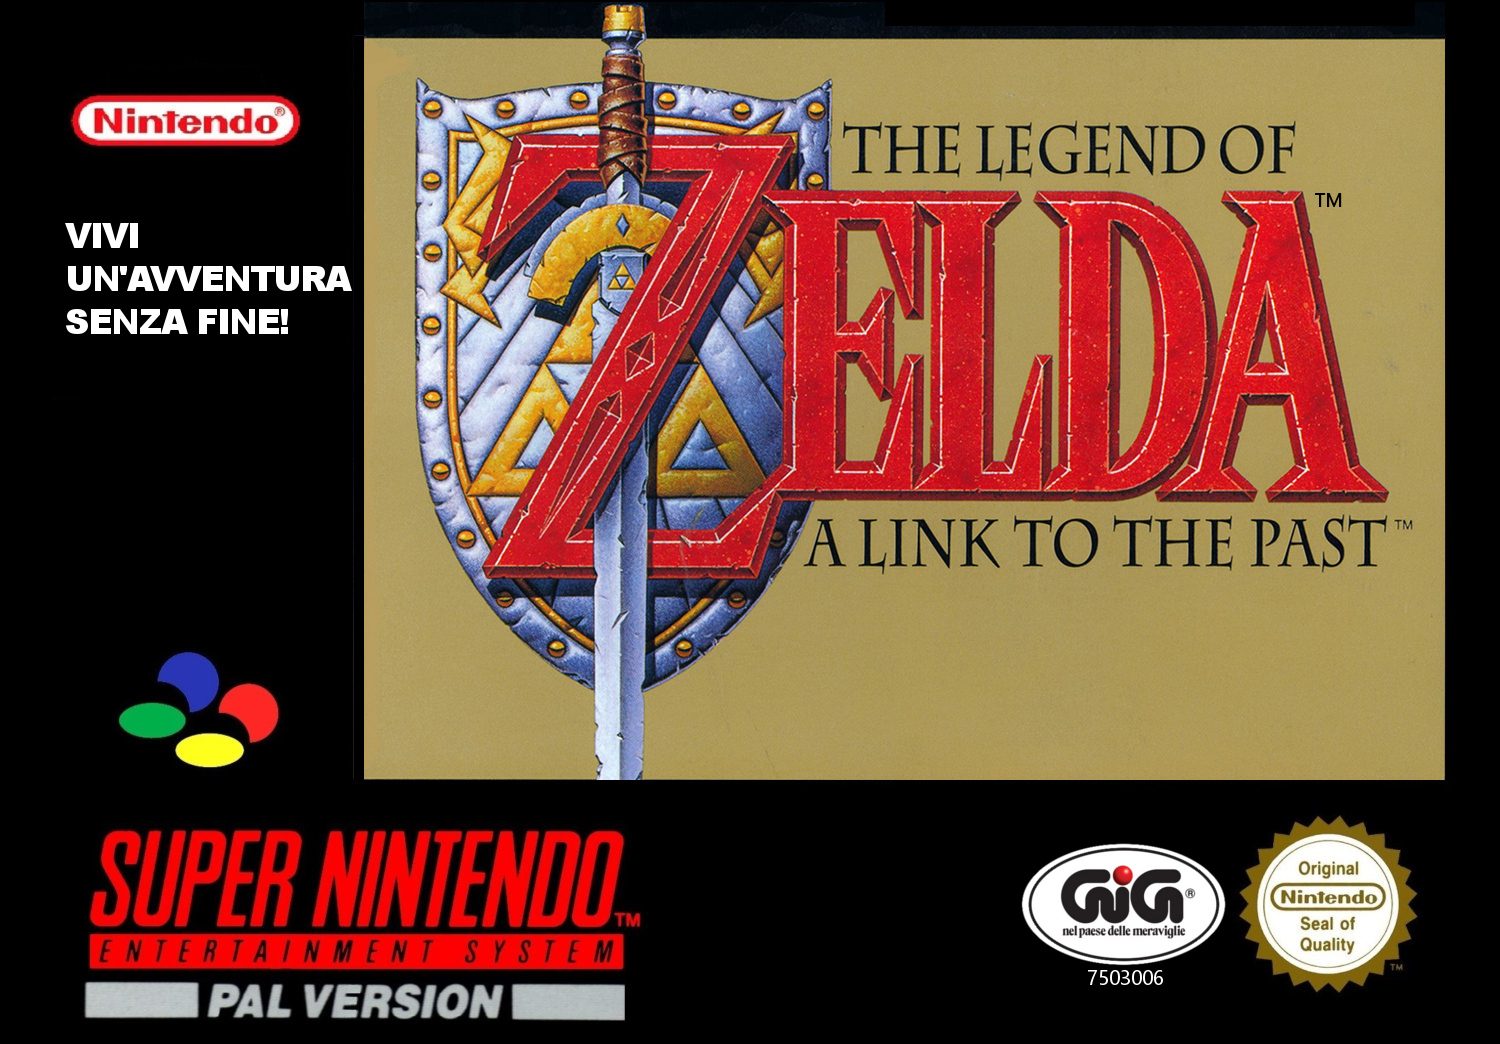  Games - The Legend of Zelda: A Link to the Past